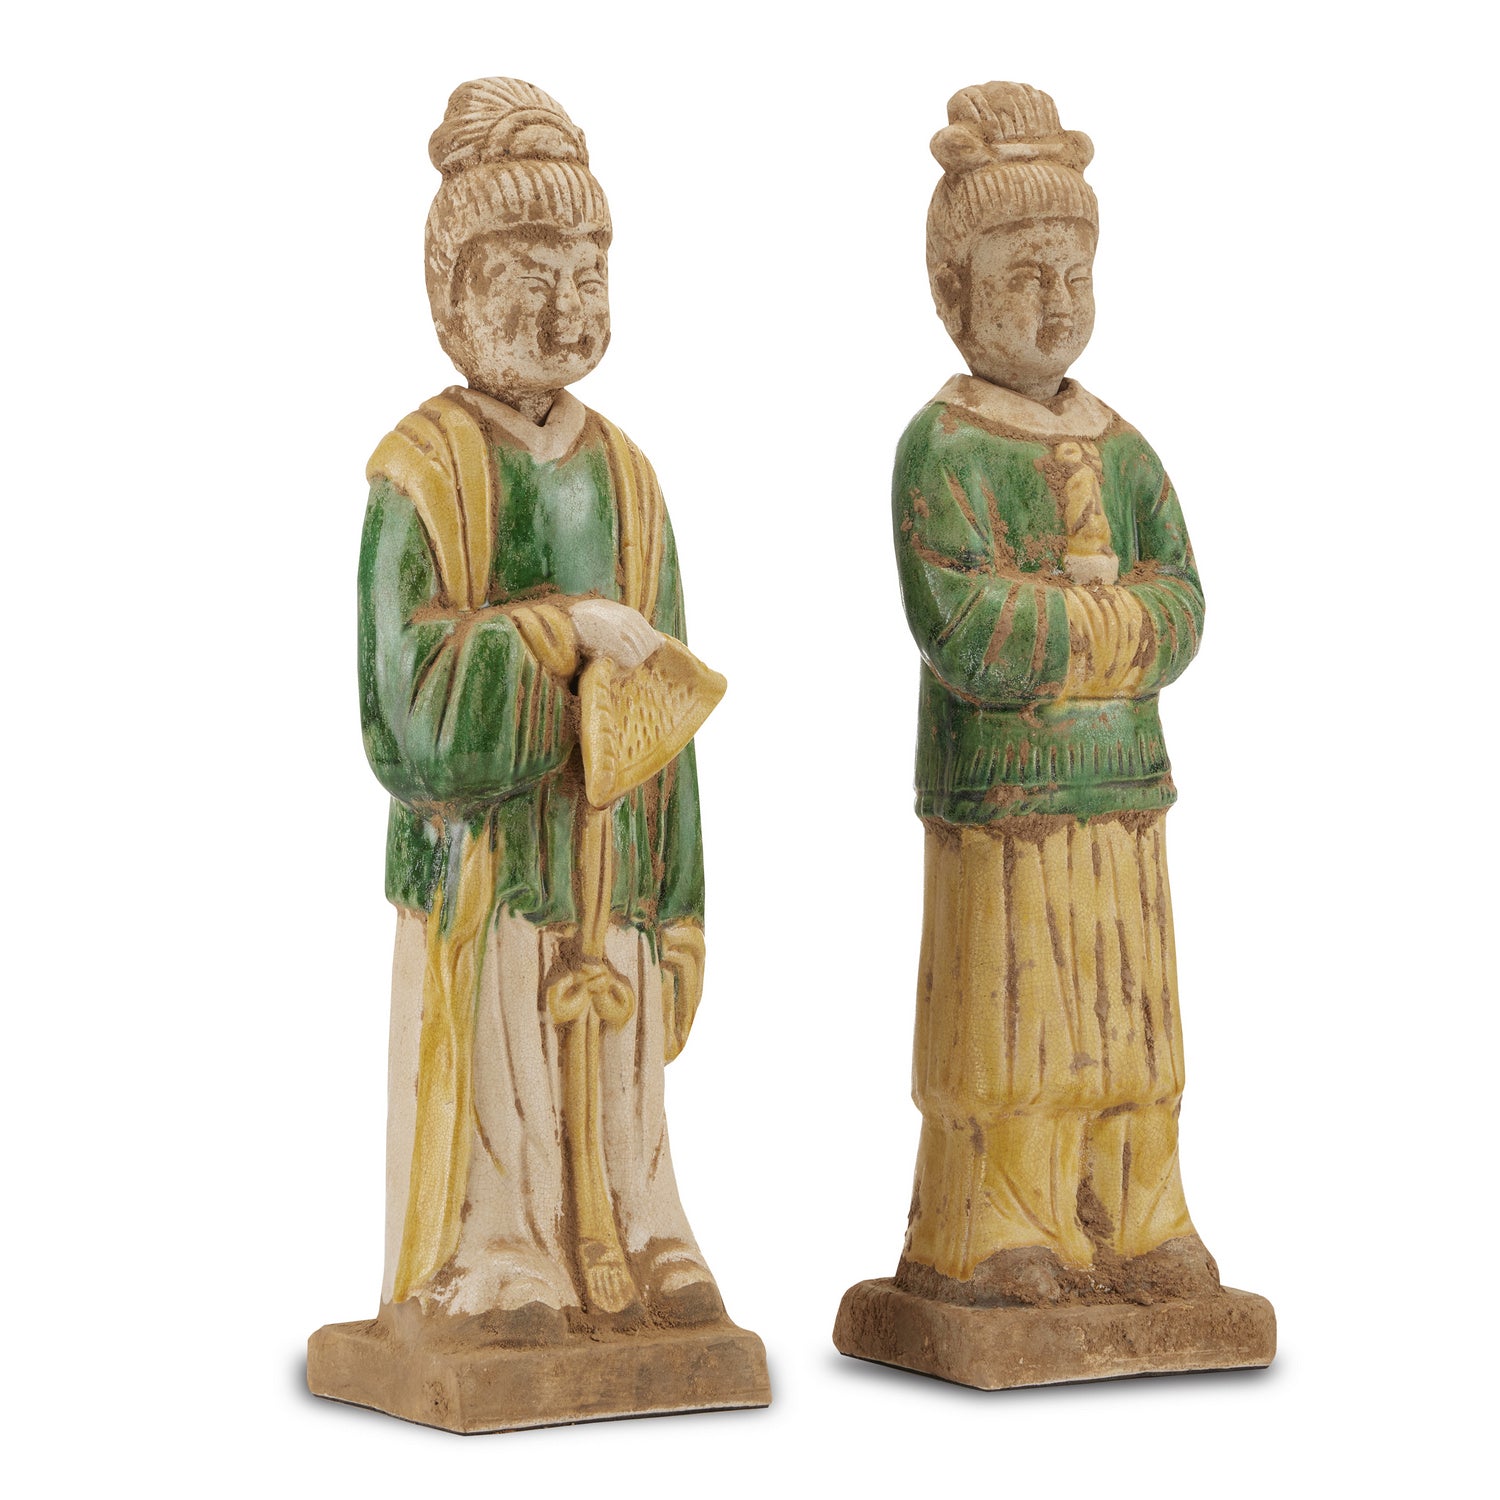 Object from the Tang Dynasty Palace collection in Green/Yellow finish